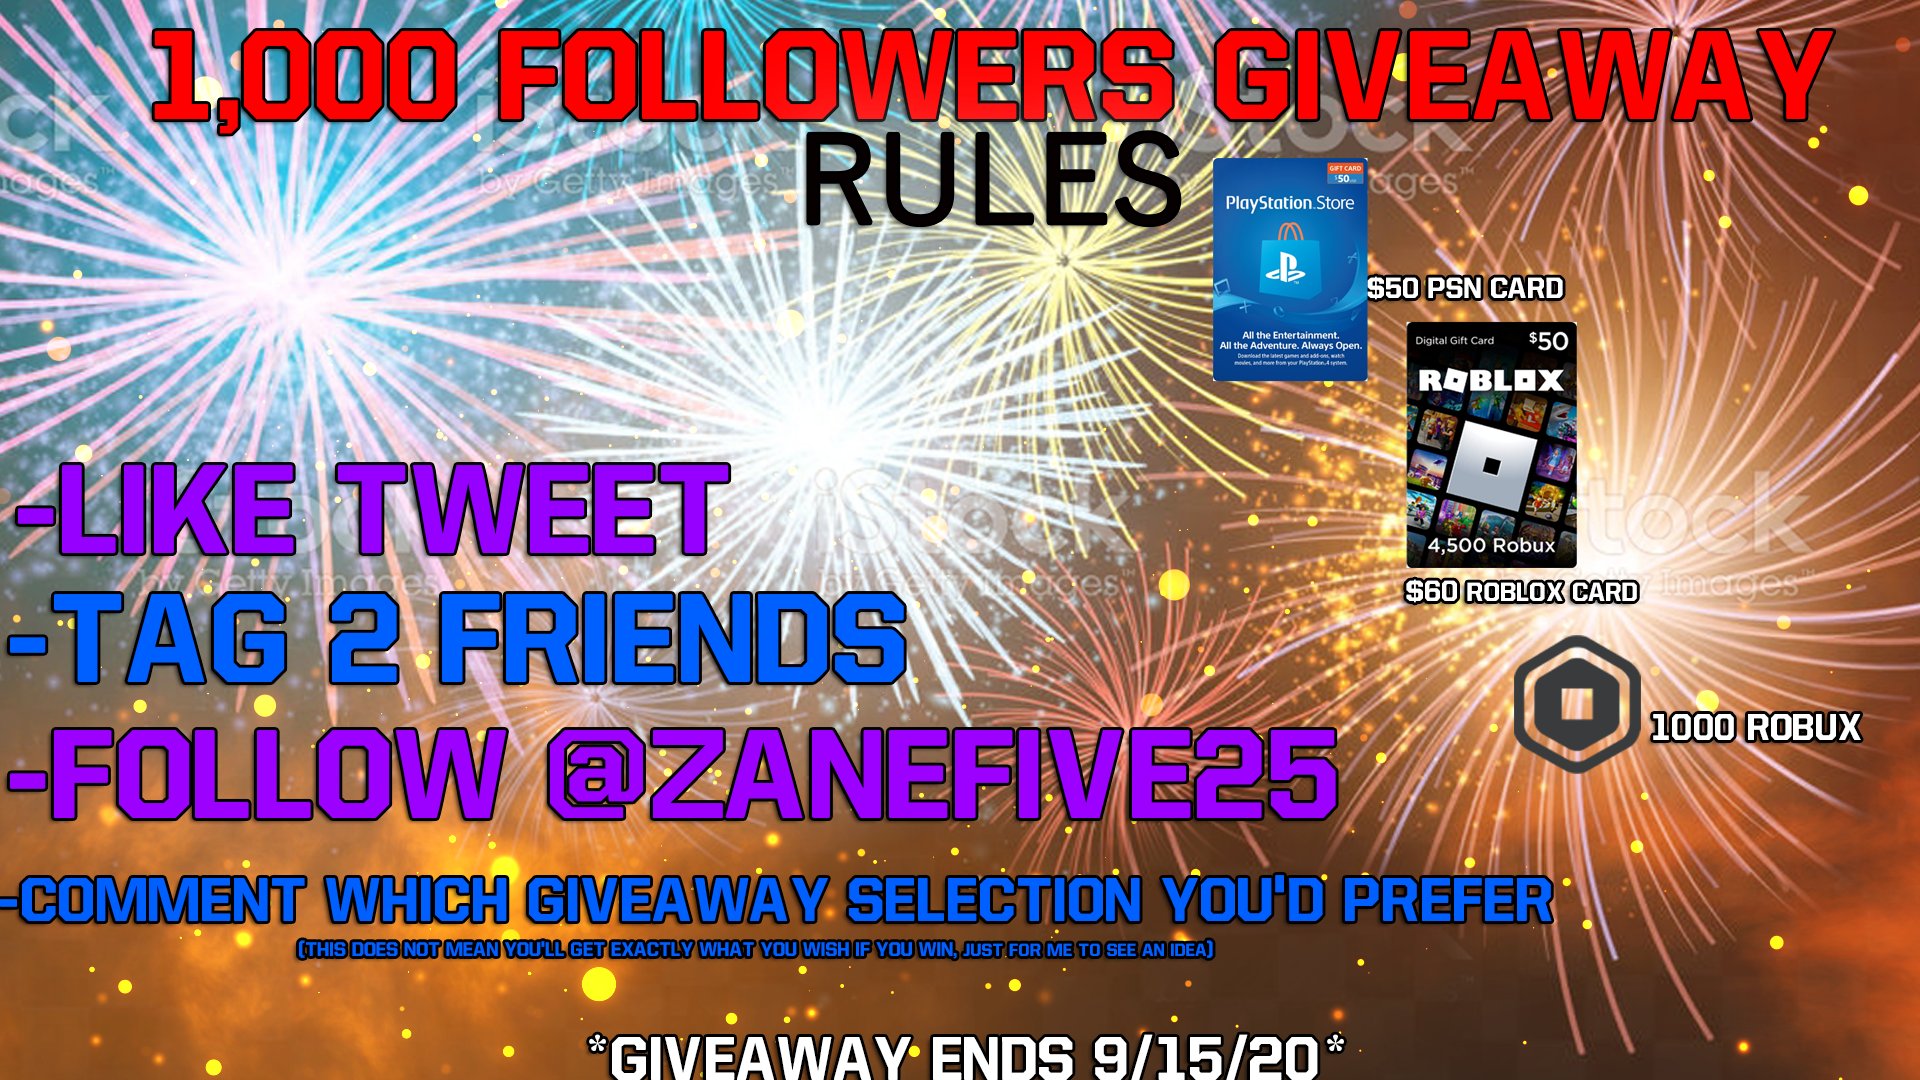 Zane On Twitter 1 000 Followers Giveaway Special Giveaway Includes 50 Psn 60 Roblox Card 1 000 Robuxs This Was A Lot Of Money To Spend On This Thank You To My Mother - how to get 1,000 followers on roblox